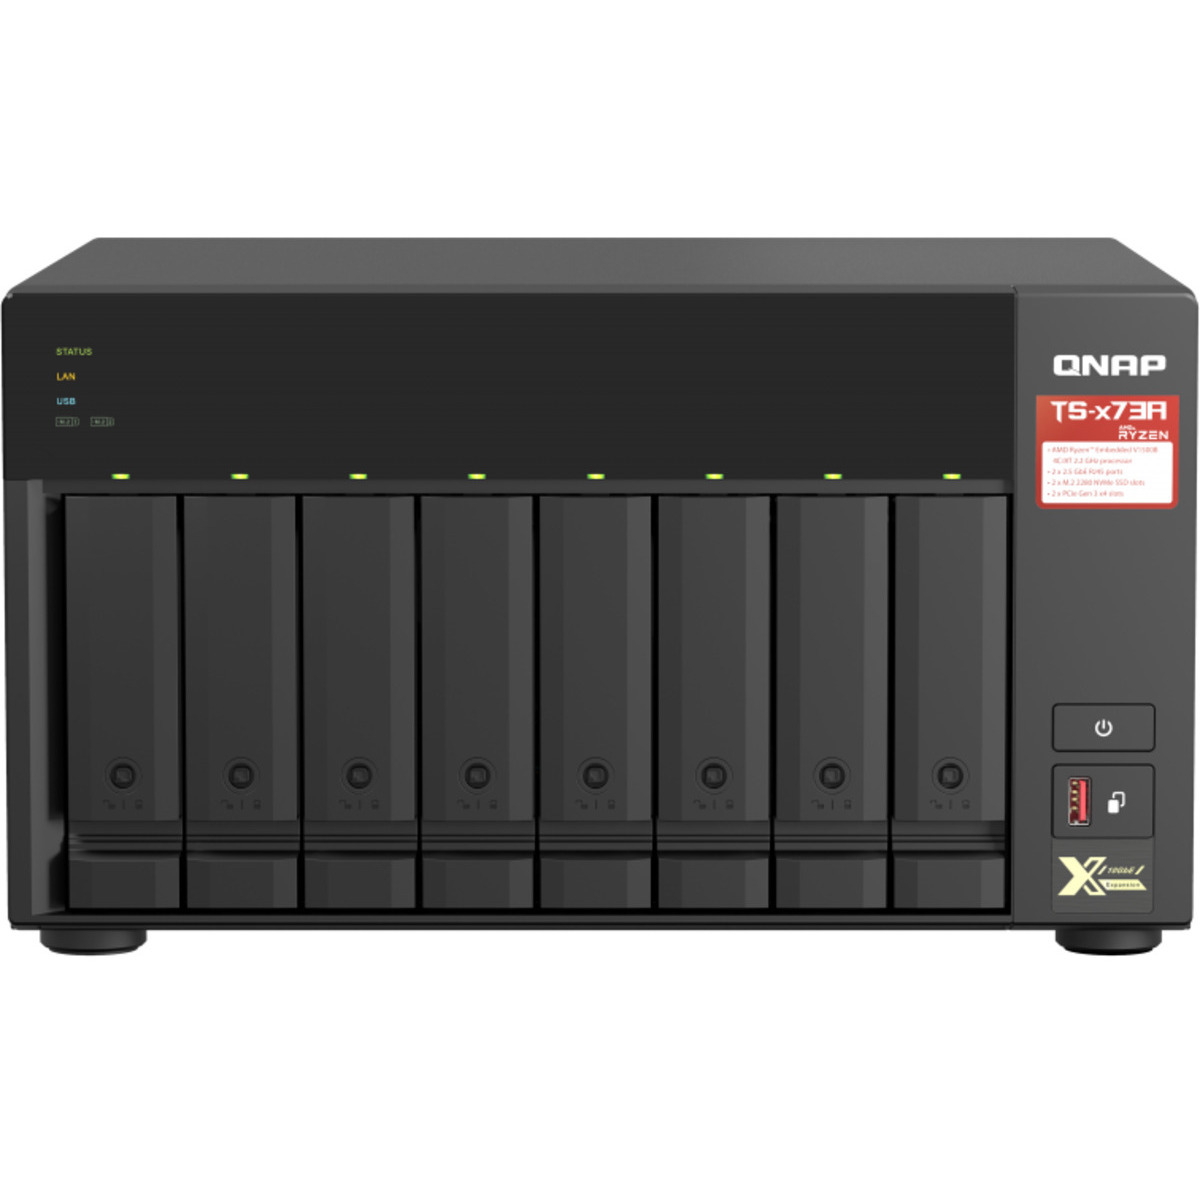 QNAP TS-873A 16tb 8-Bay Desktop Multimedia / Power User / Business NAS - Network Attached Storage Device 4x4tb Seagate IronWolf Pro ST4000NT001 3.5 7200rpm SATA 6Gb/s HDD NAS Class Drives Installed - Burn-In Tested TS-873A